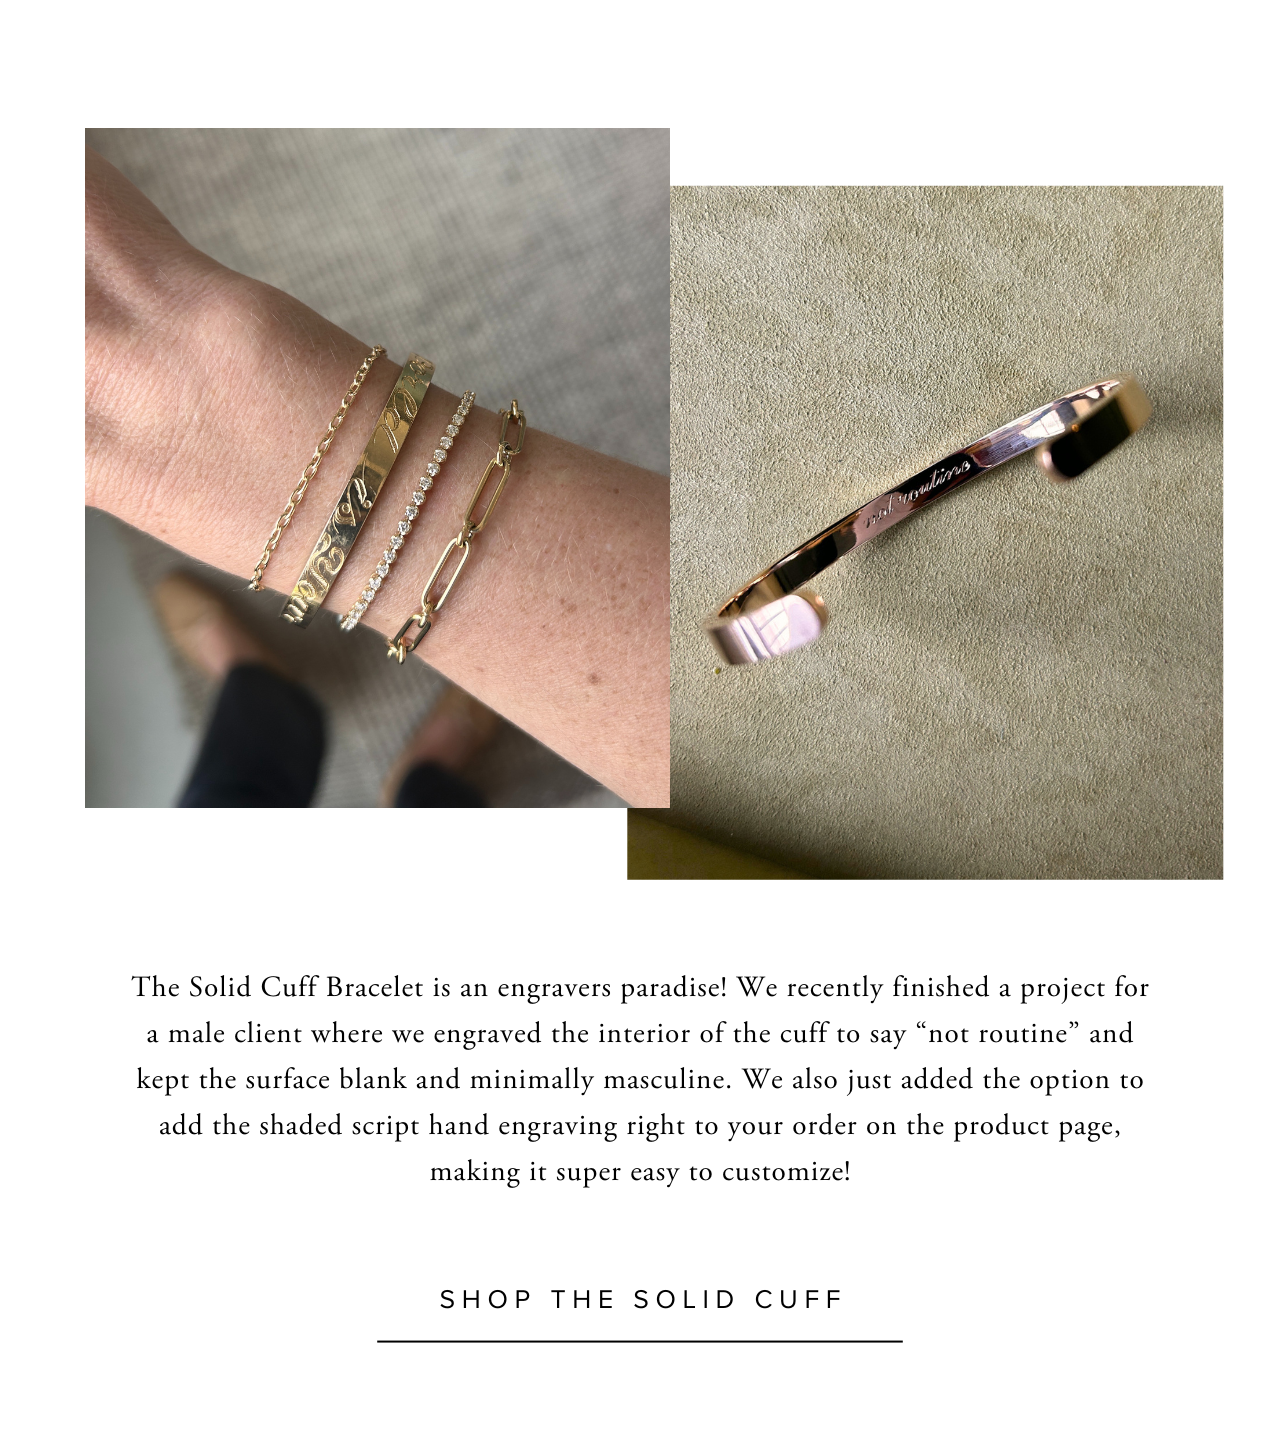 Shop the Solid Cuff